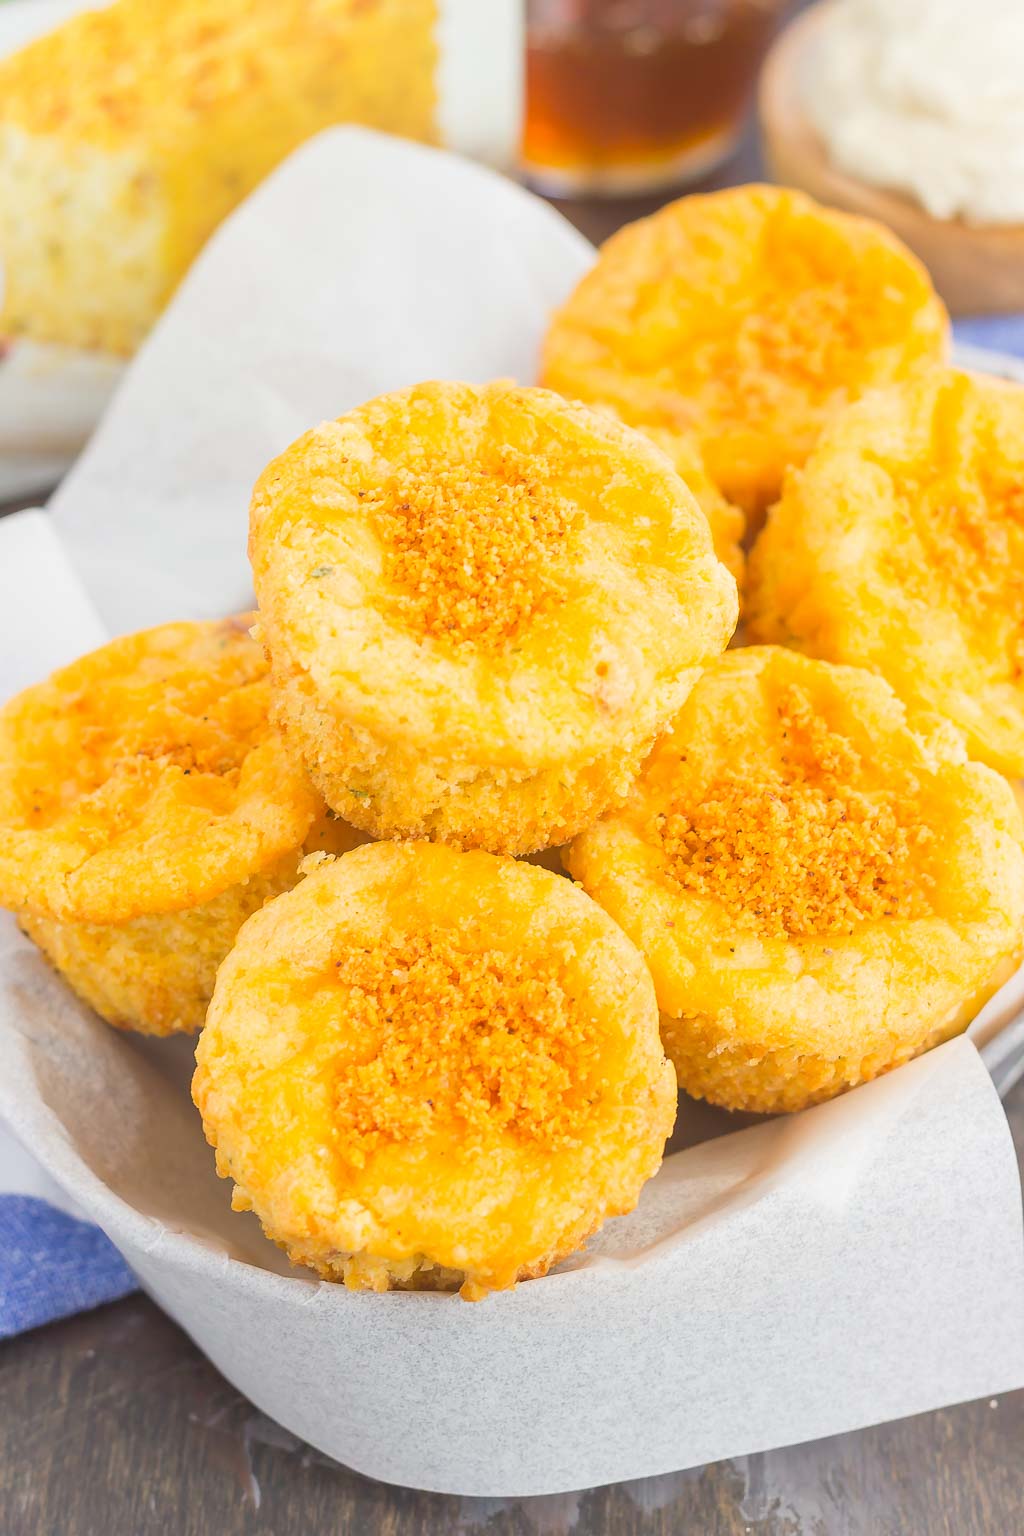 These Cheesy Cornbread Muffins are loaded with flavor and easy to make. Filled with cheddar cheese, zesty spices and baked until golden, these muffins are perfect to serve as a simple side dish or snack! #cornbread #cornbreadrecipe #cornbreadmuffins #sidedish #breadrecipe